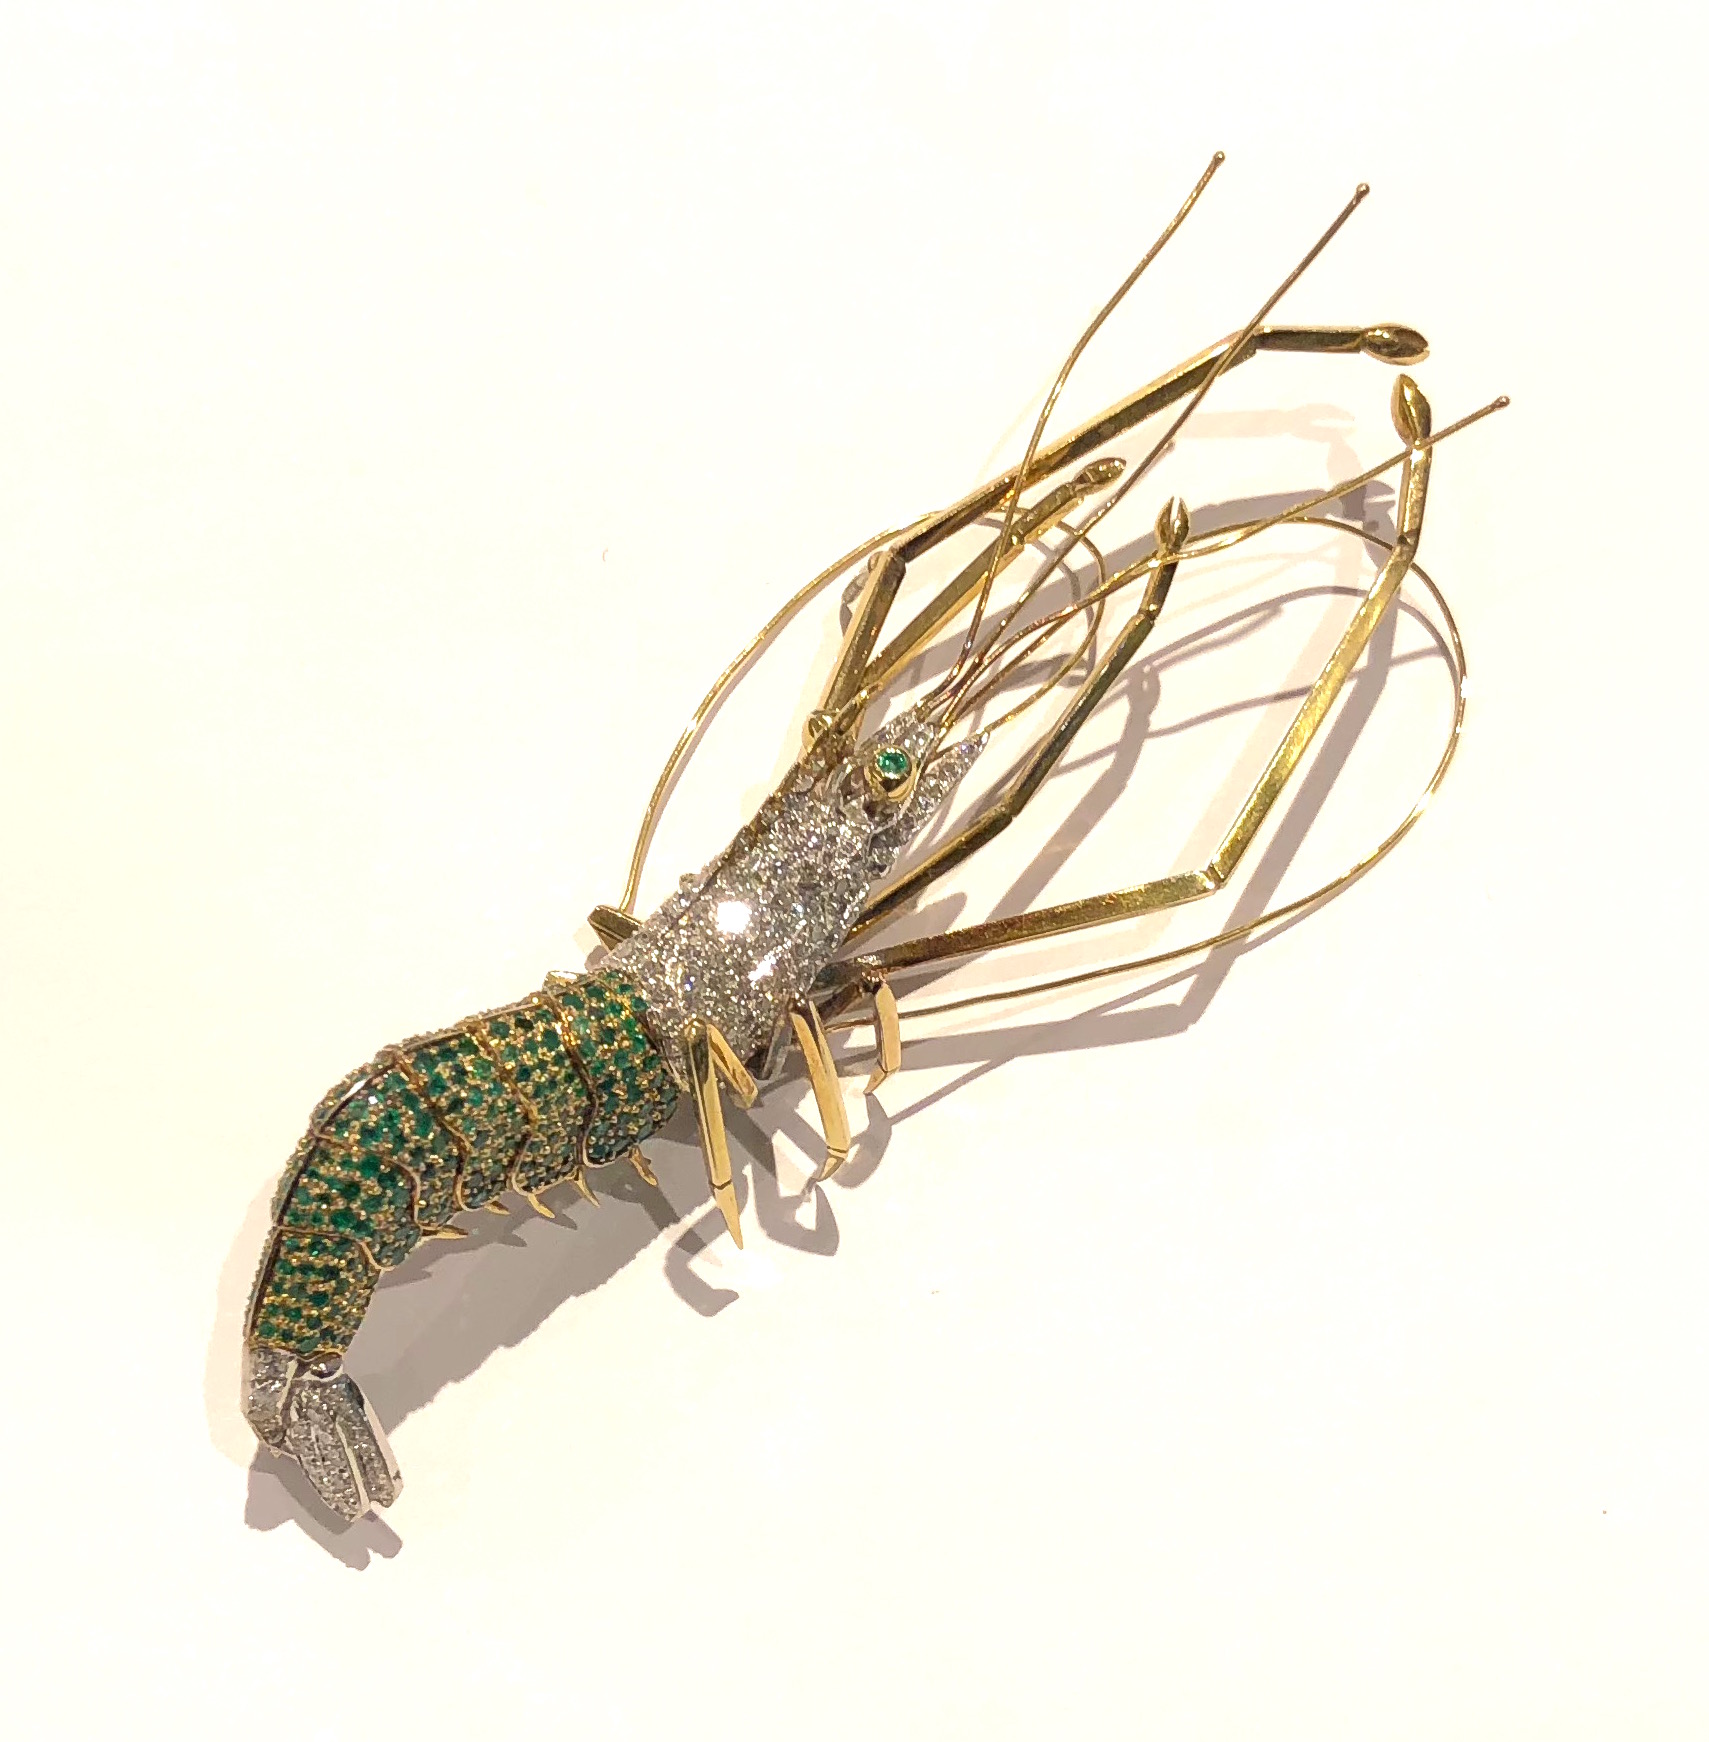 Jeweled and highly detailed “Shrimp” brooch, tsavorite garnets and diamonds pave set throughout the 14 white and yellow gold body, marked, c. 1980